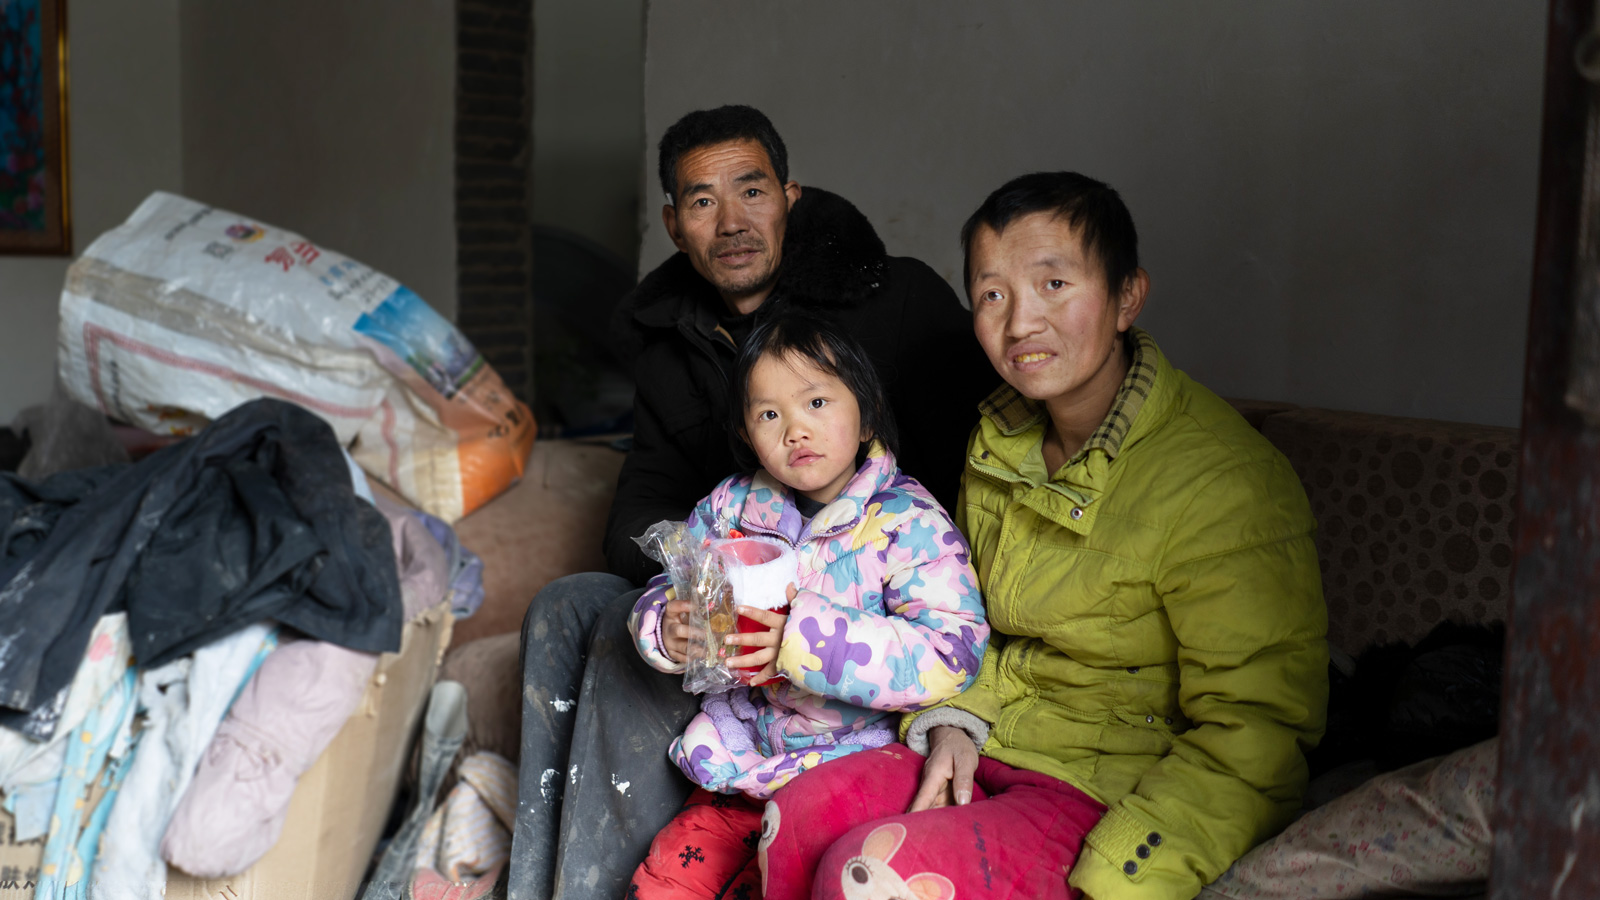 Zhenzhen and her mom and dad at home